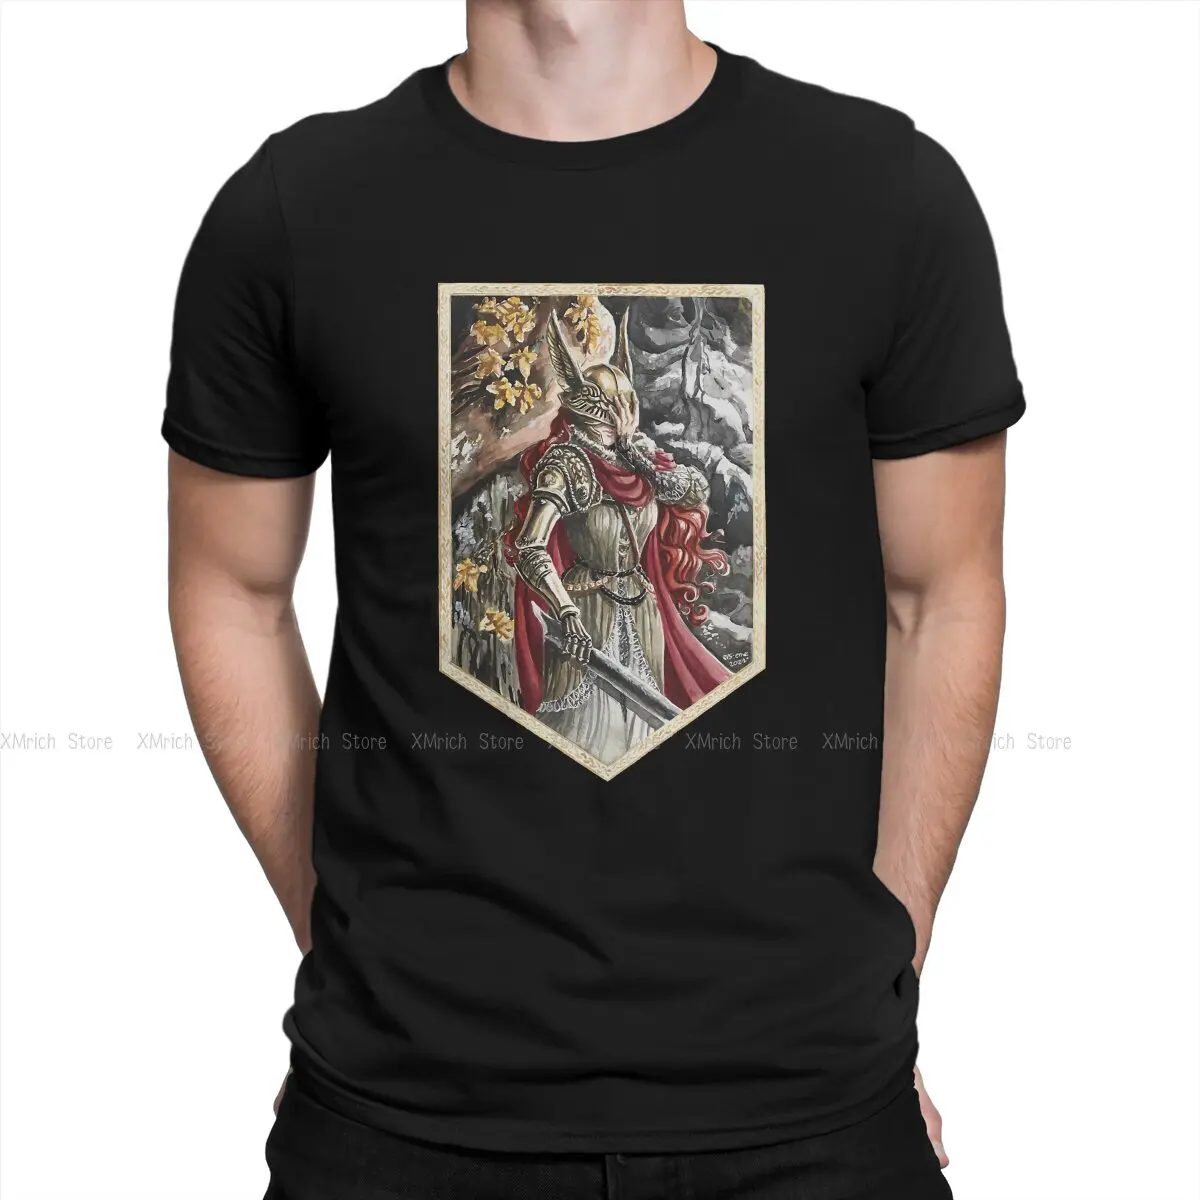 

Valkyrie T-Shirts Men Elden Ring Game Awesome 100% Cotton Tees Round Collar Short Sleeve T Shirt Gift Idea Clothing